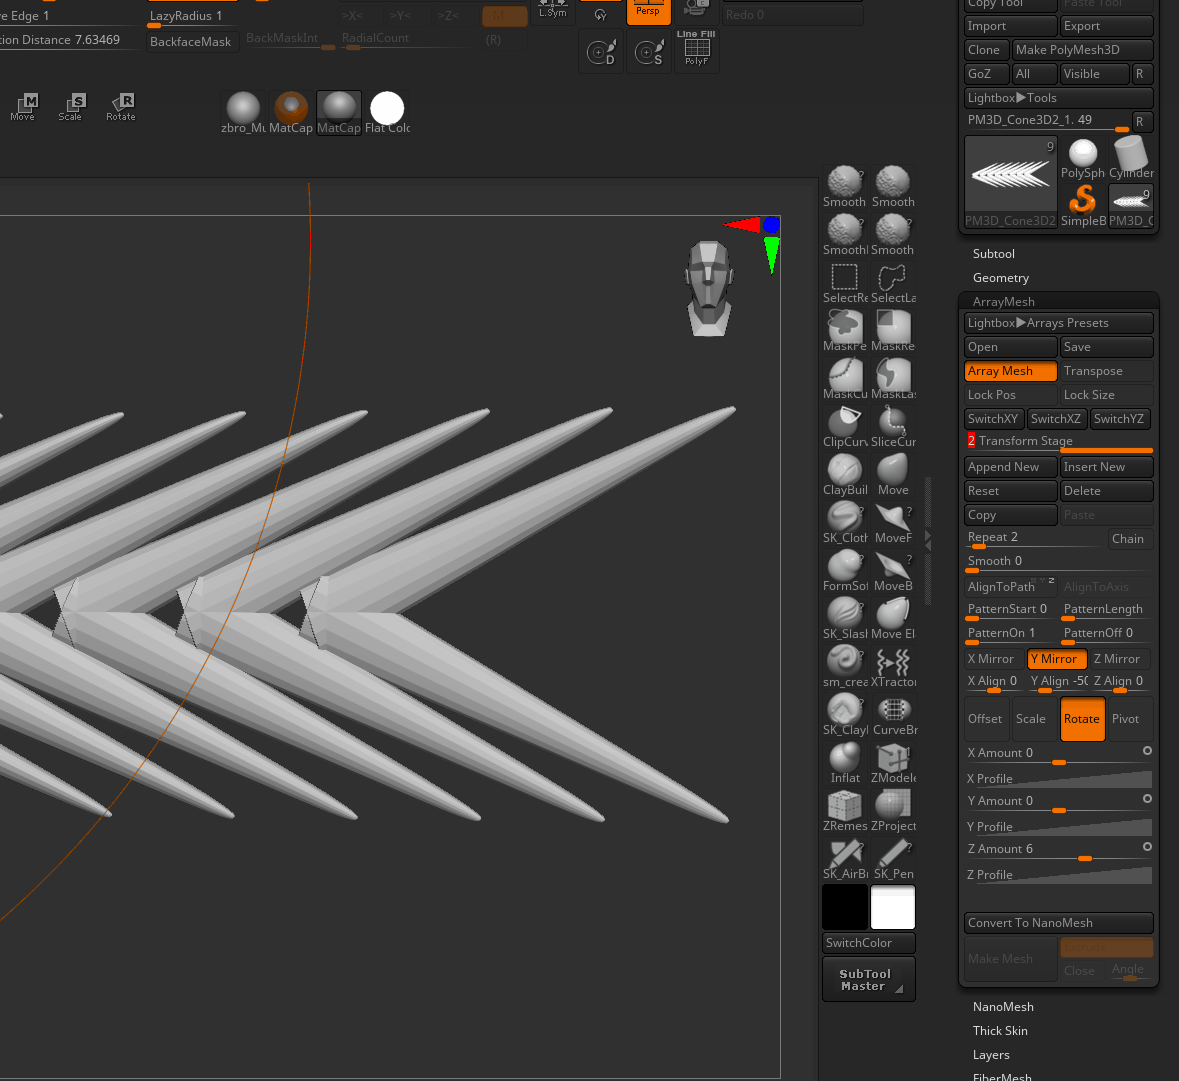 how to use array mesh in zbrush